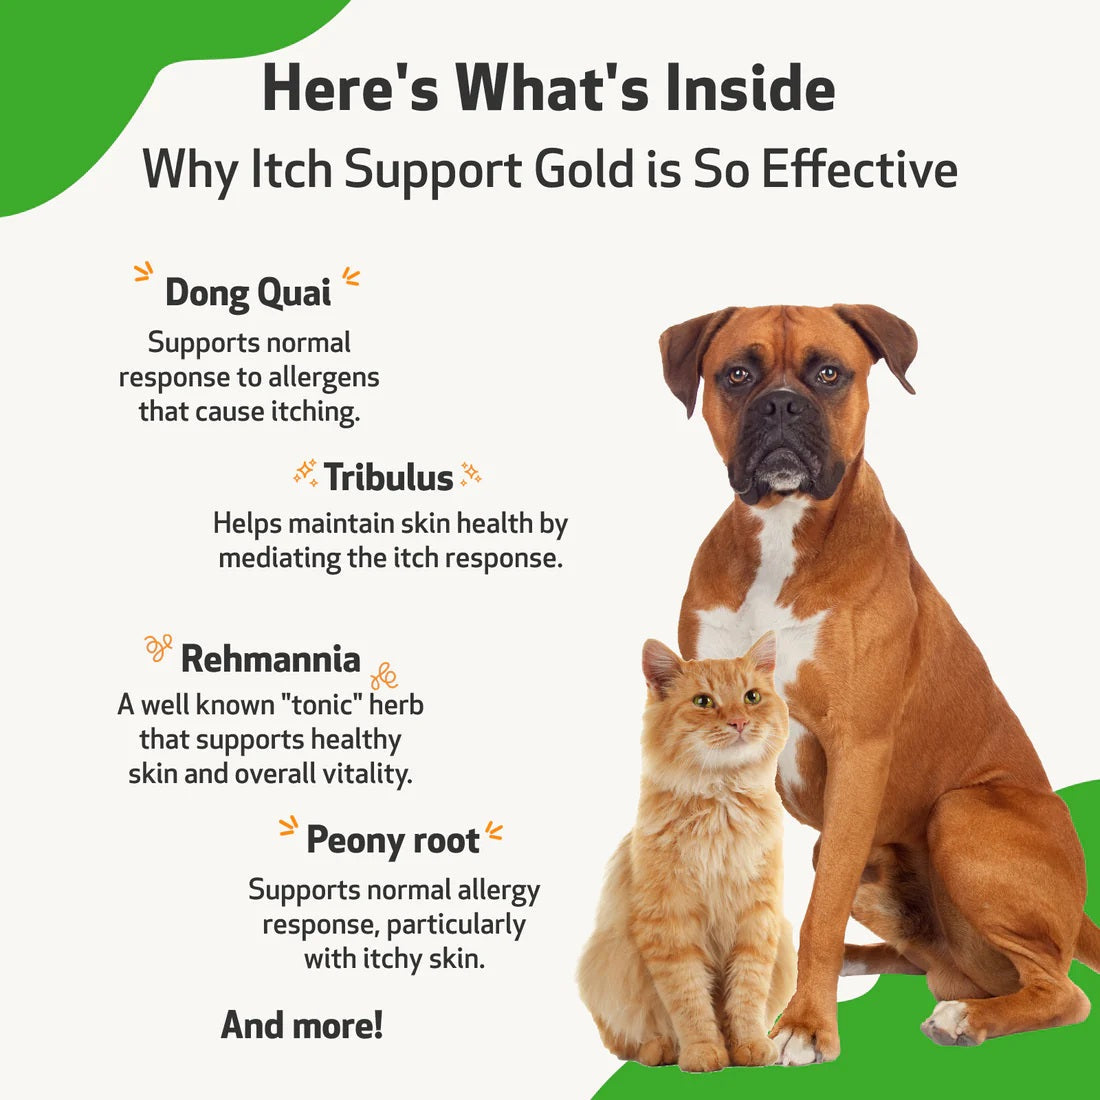 Pet Wellbeing - Itch Support Gold - for Soothing Allergy-Related Itch in Dogs